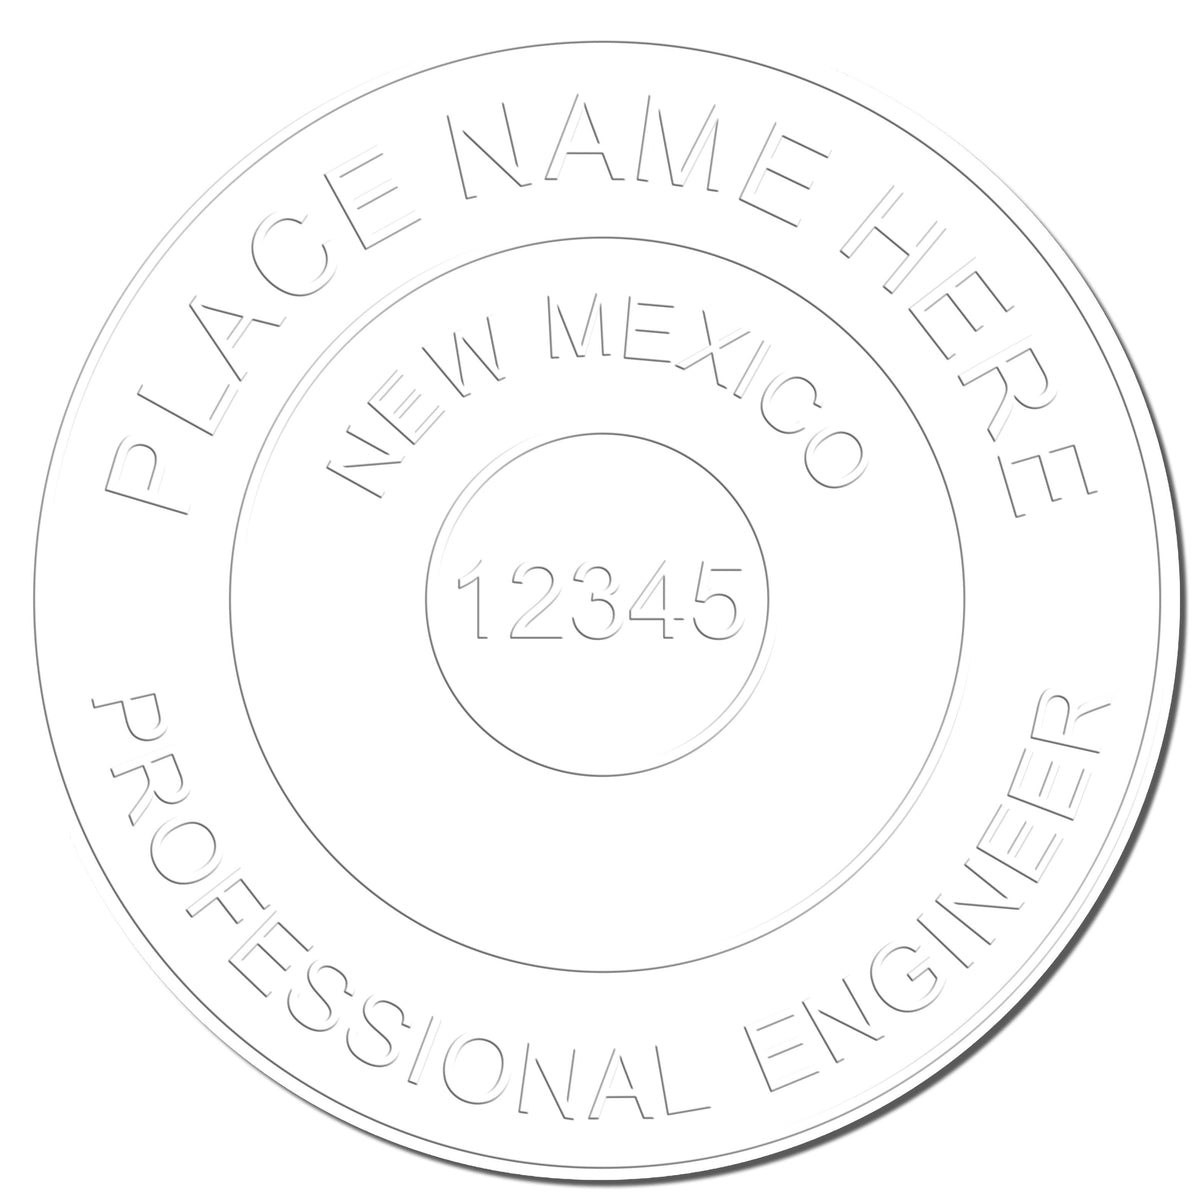 A photograph of the Handheld New Mexico Professional Engineer Embosser stamp impression reveals a vivid, professional image of the on paper.